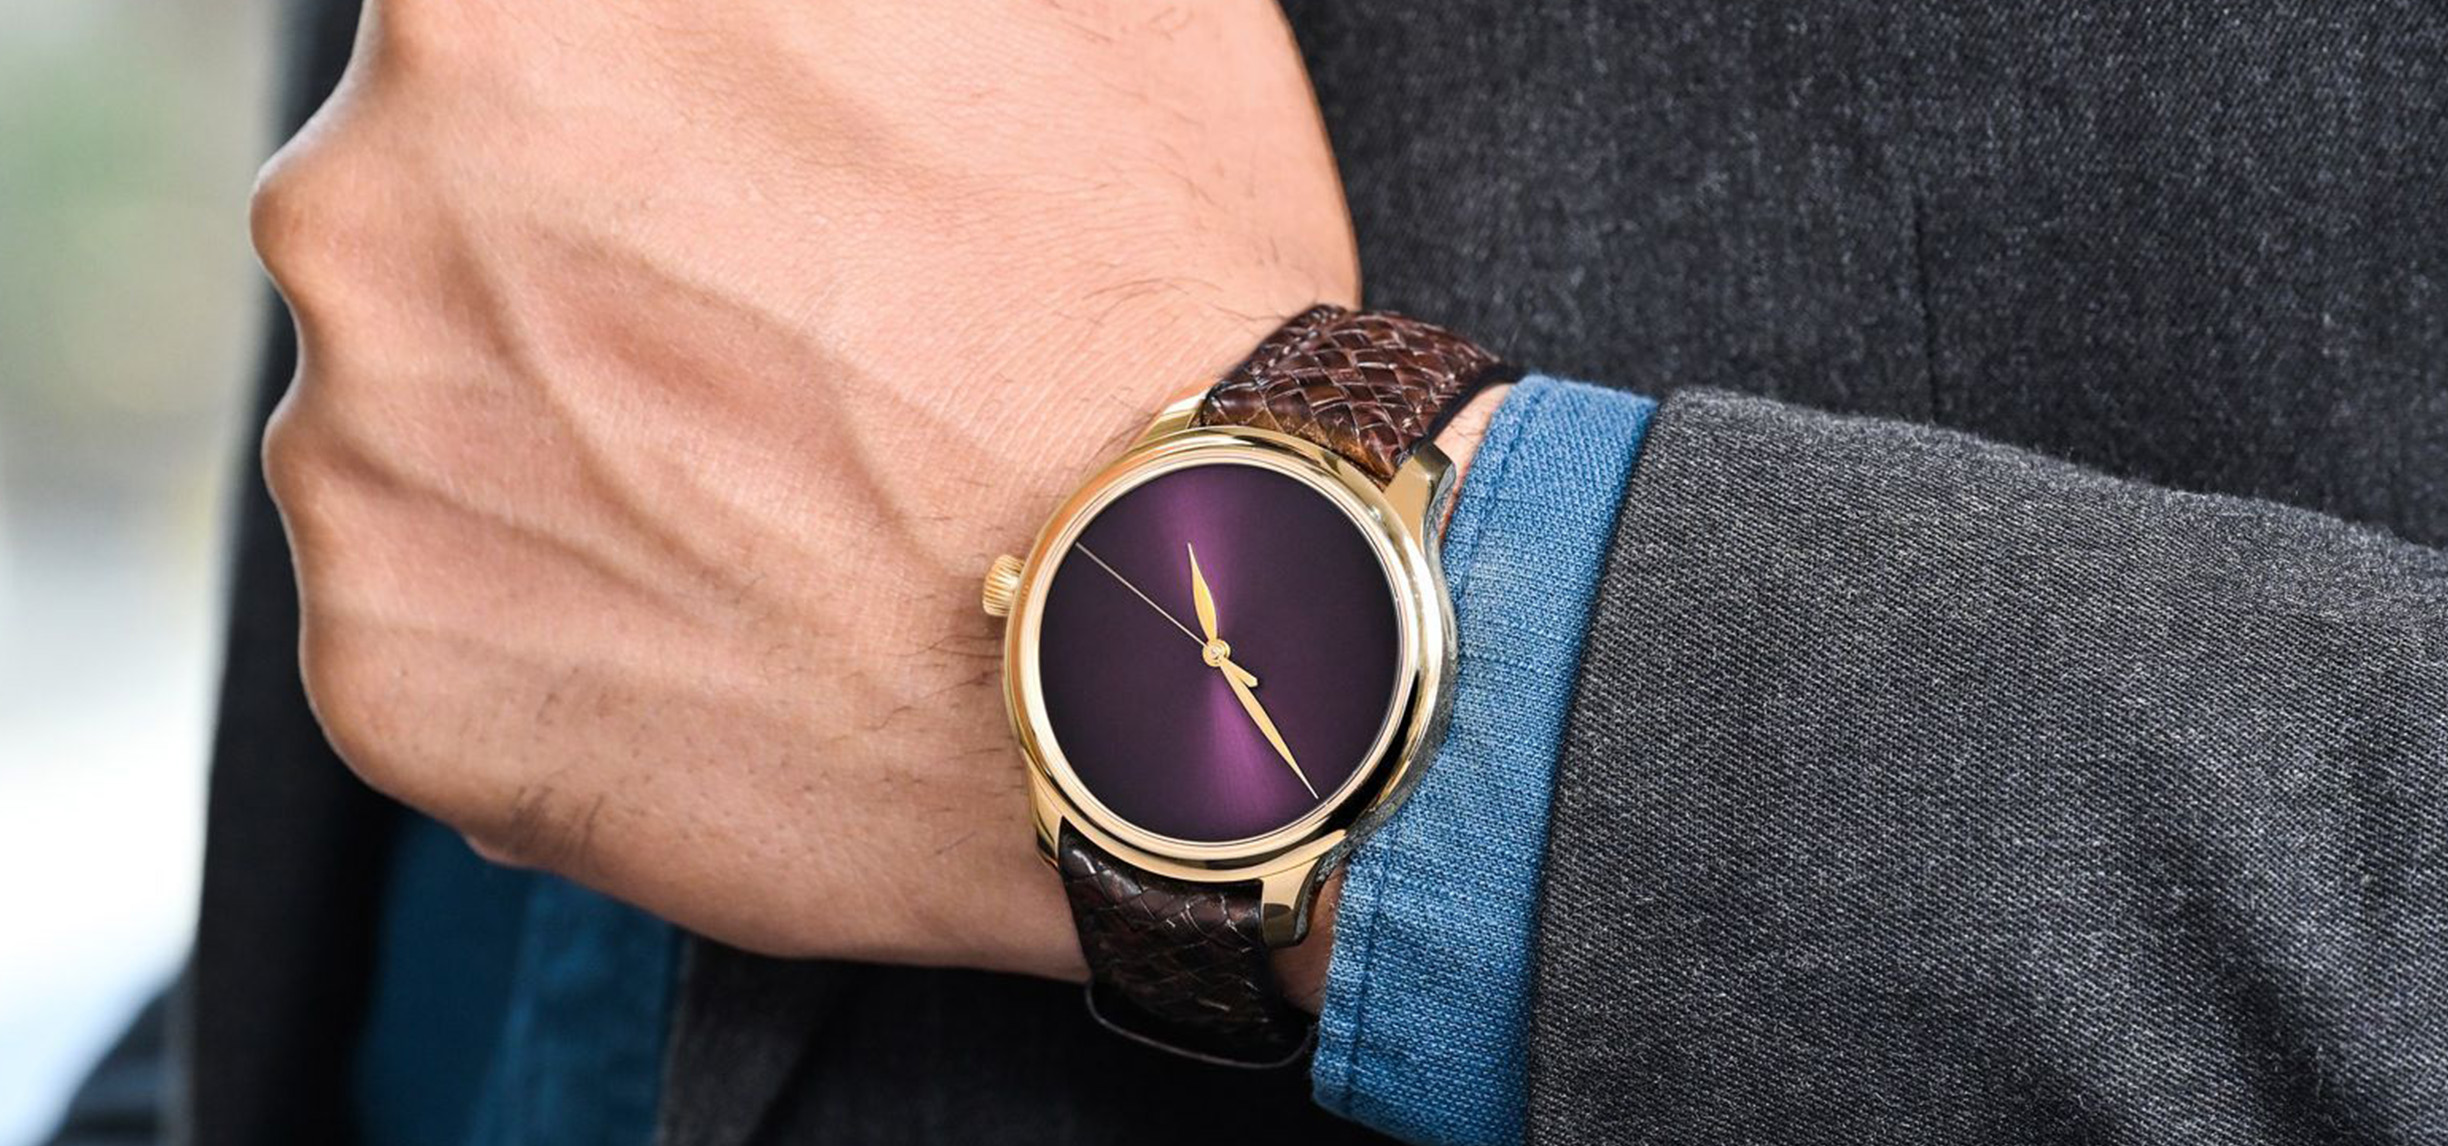 Embodying Unmistakable Authority: Luxurious Watches To Nail Your Work Look